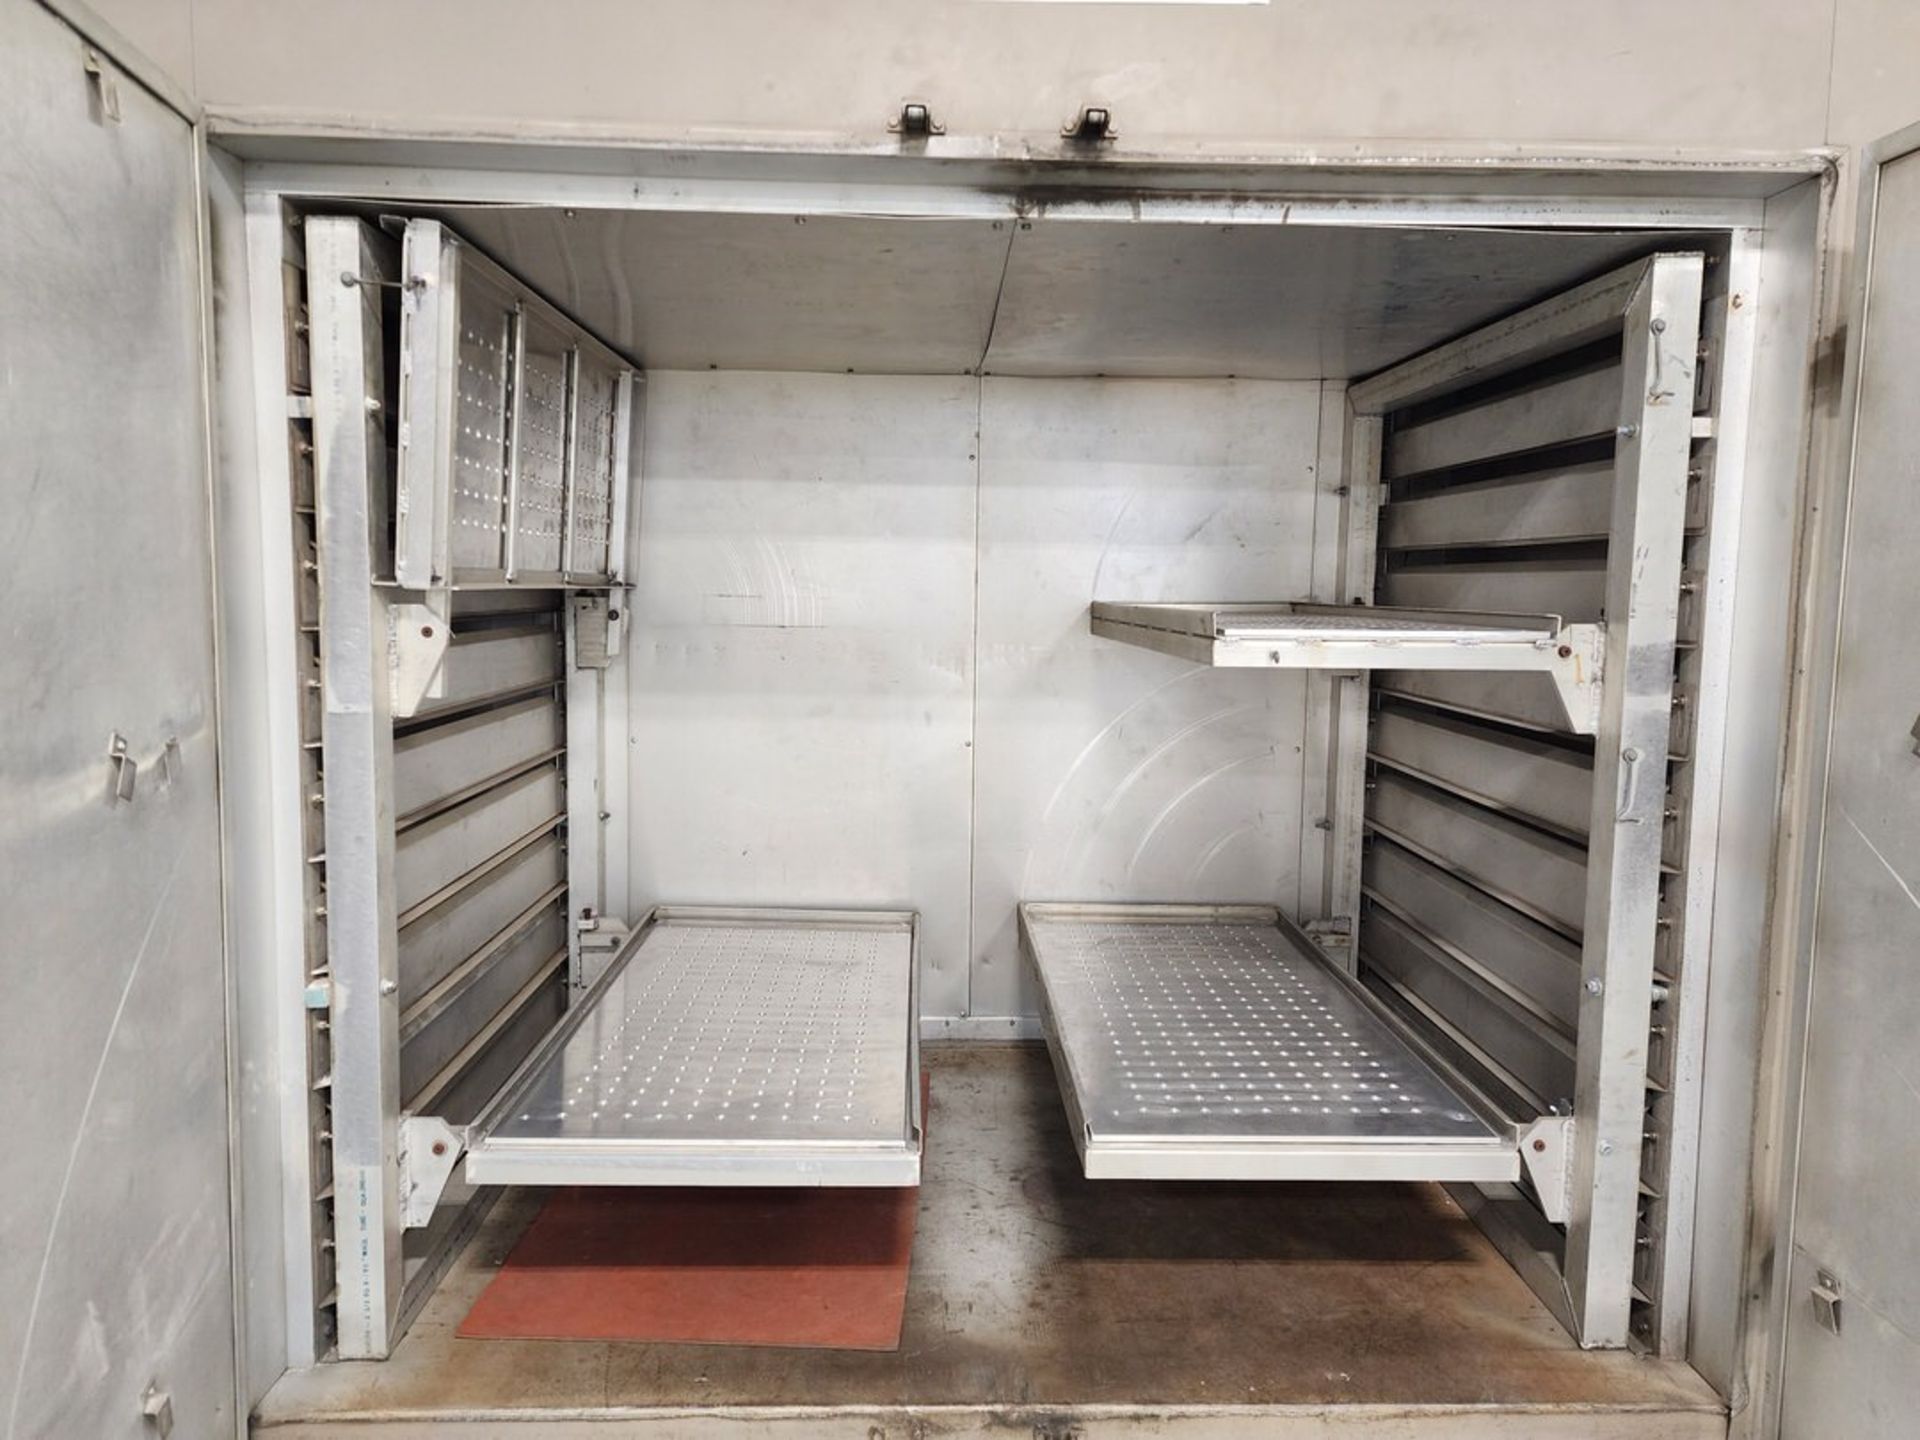 Koch HBE-645 Batch Oven Max Temp: 500F, Size: 6' x 4' x 5' (Asset# 116059 - Image 9 of 11